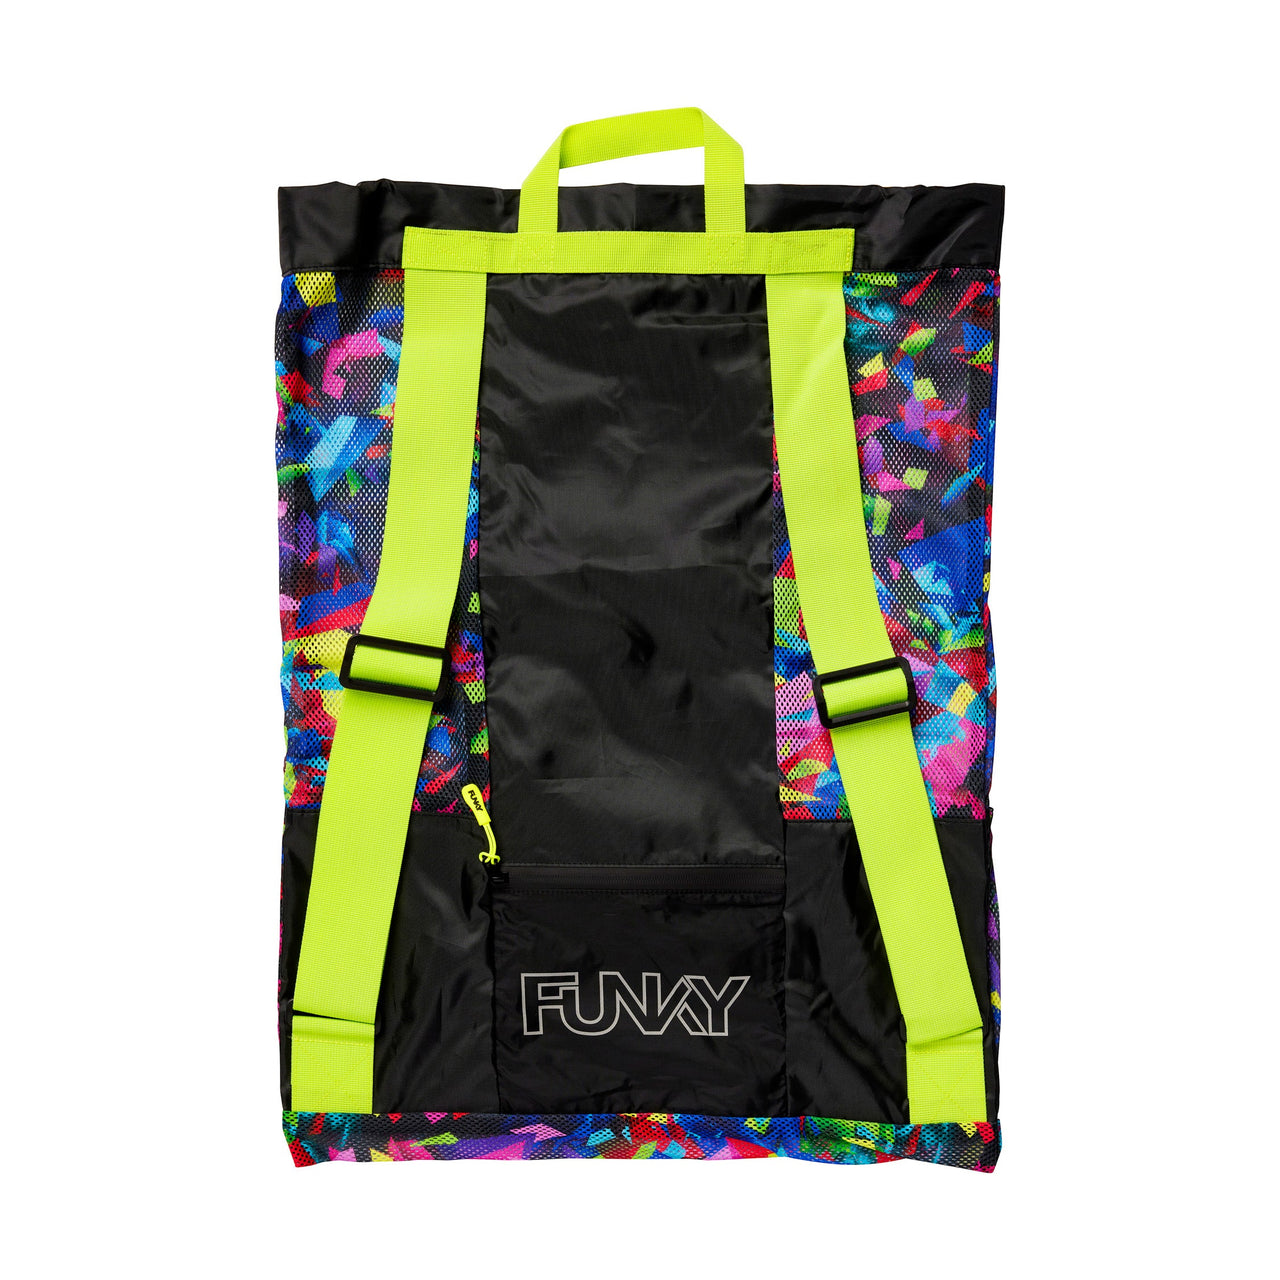 FUNKY TRUNKS DESTROYER GEAR UP MESH BACKPACK - Multicolour